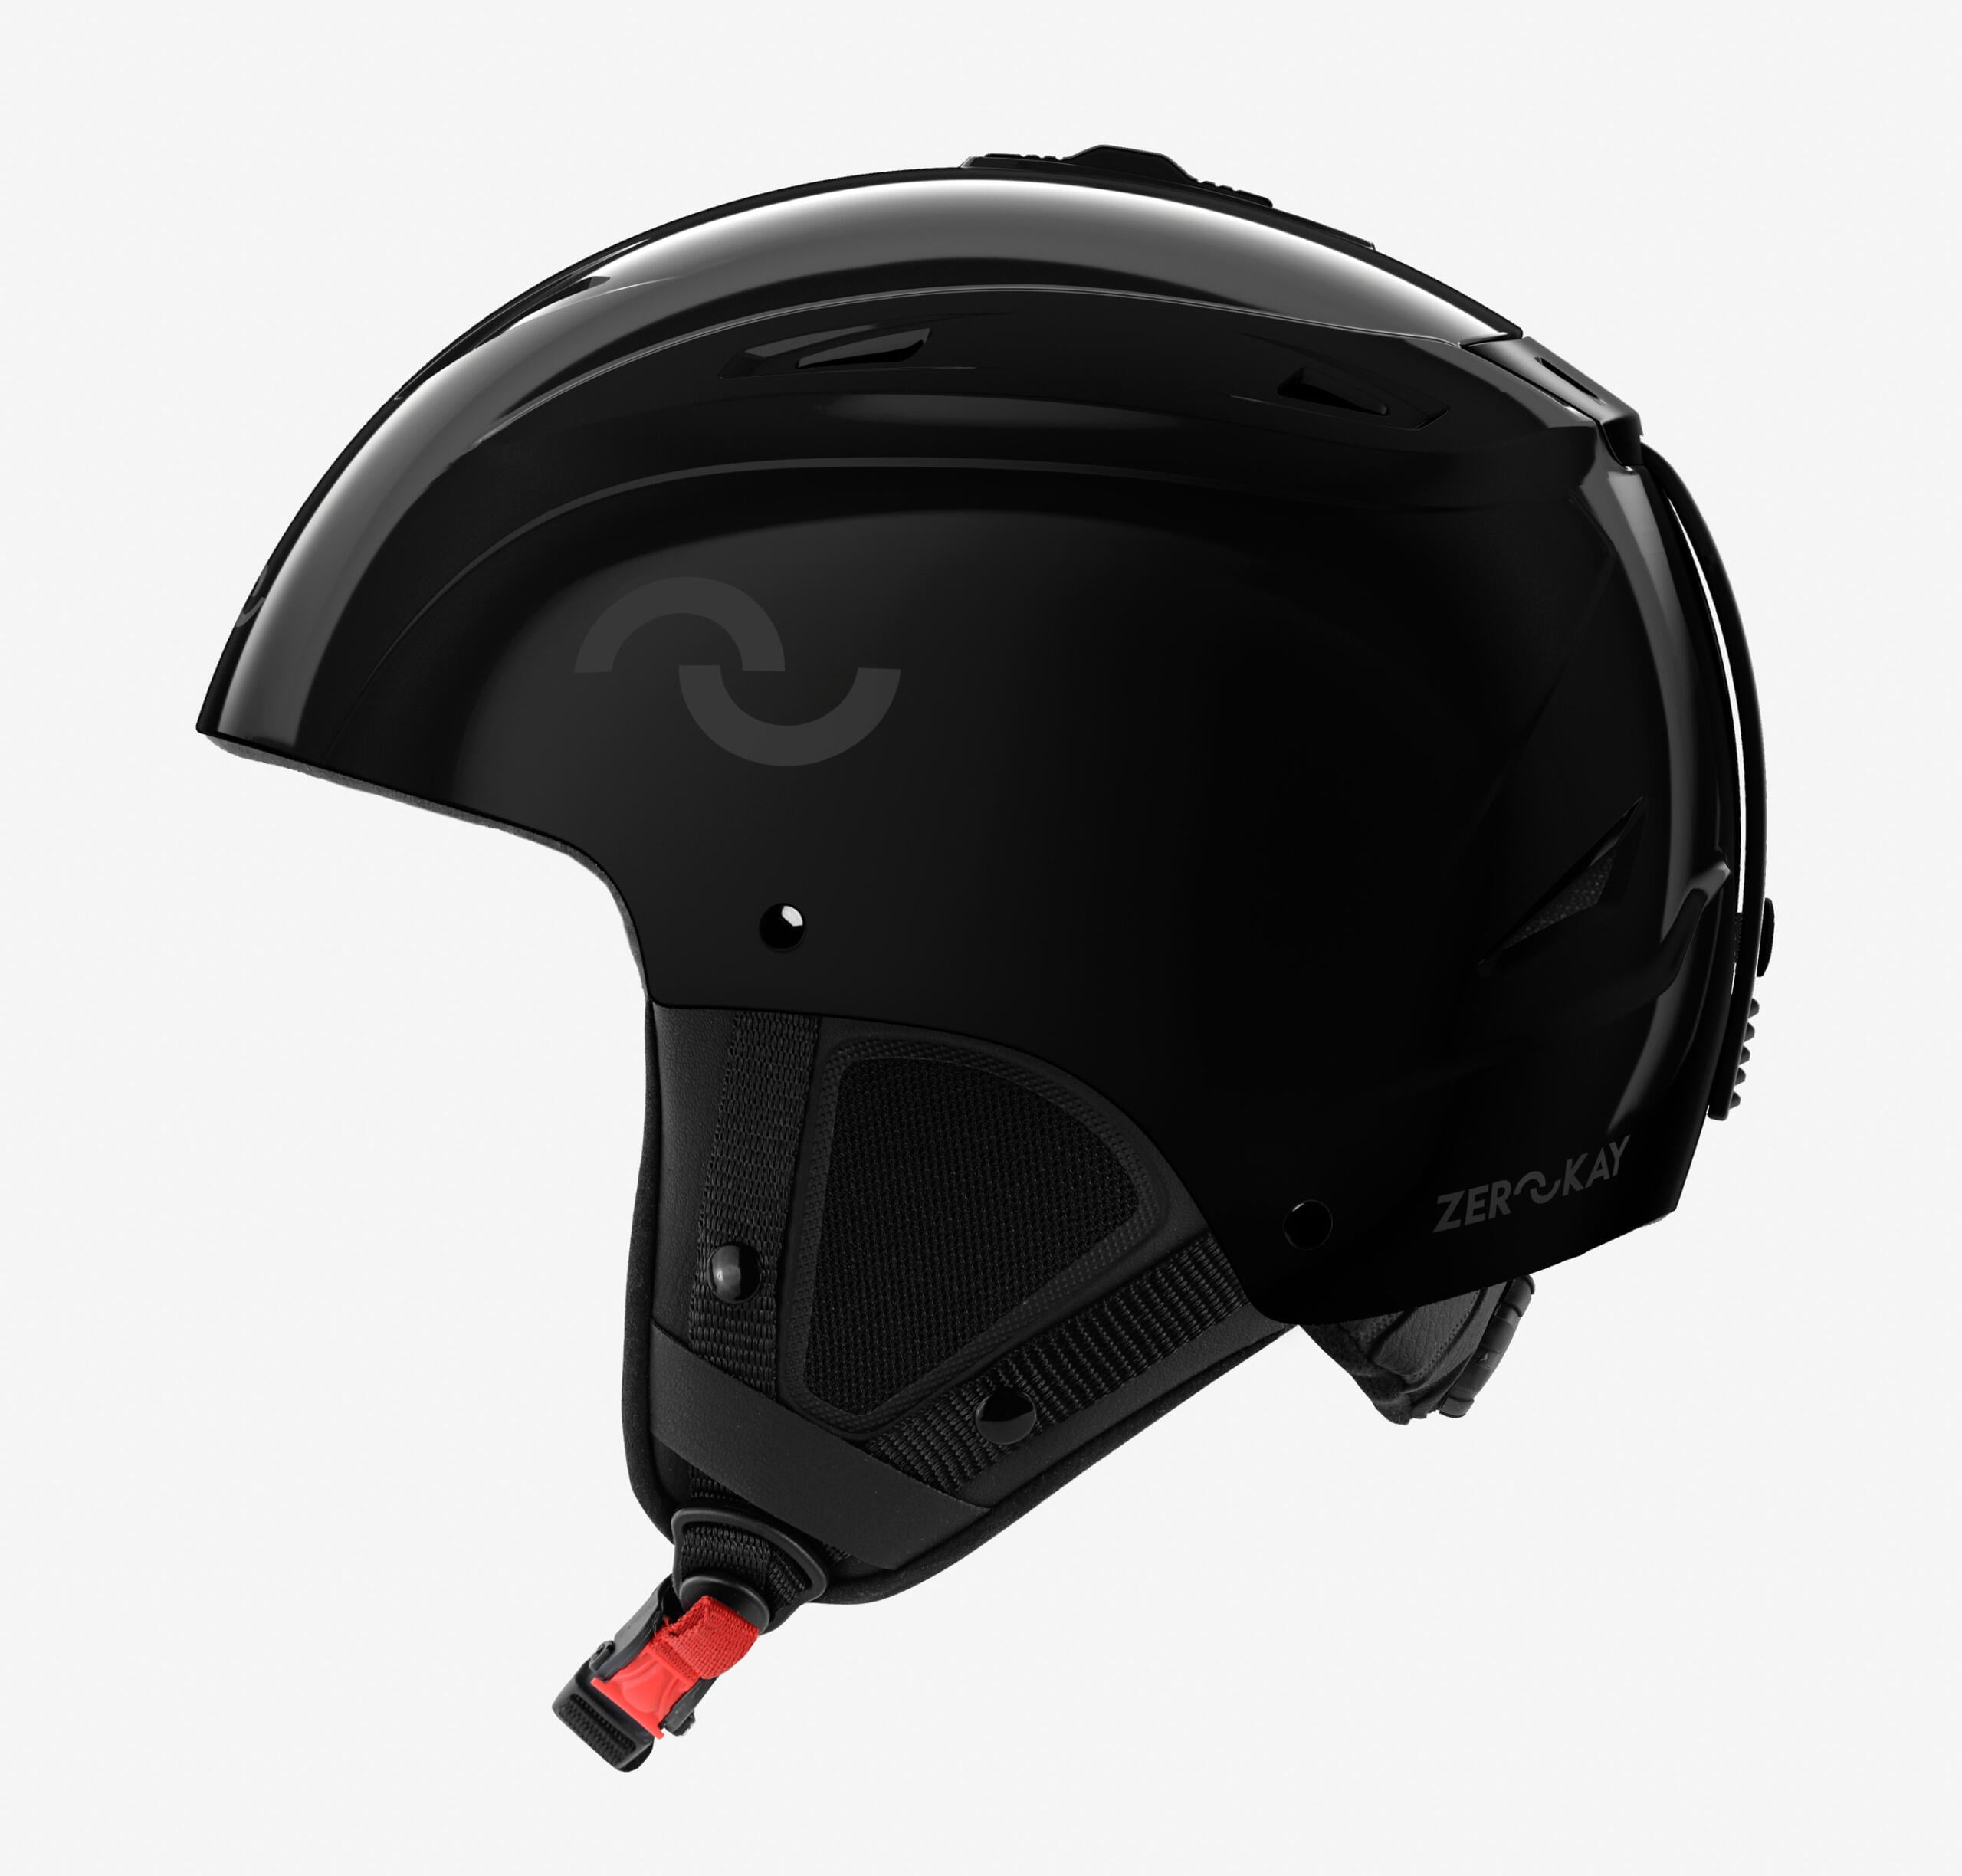 Legend UltraGloss ski helmet in black with a high-gloss finish, adaptive foam, and certified safety, epitomizing modern elegance and protection.